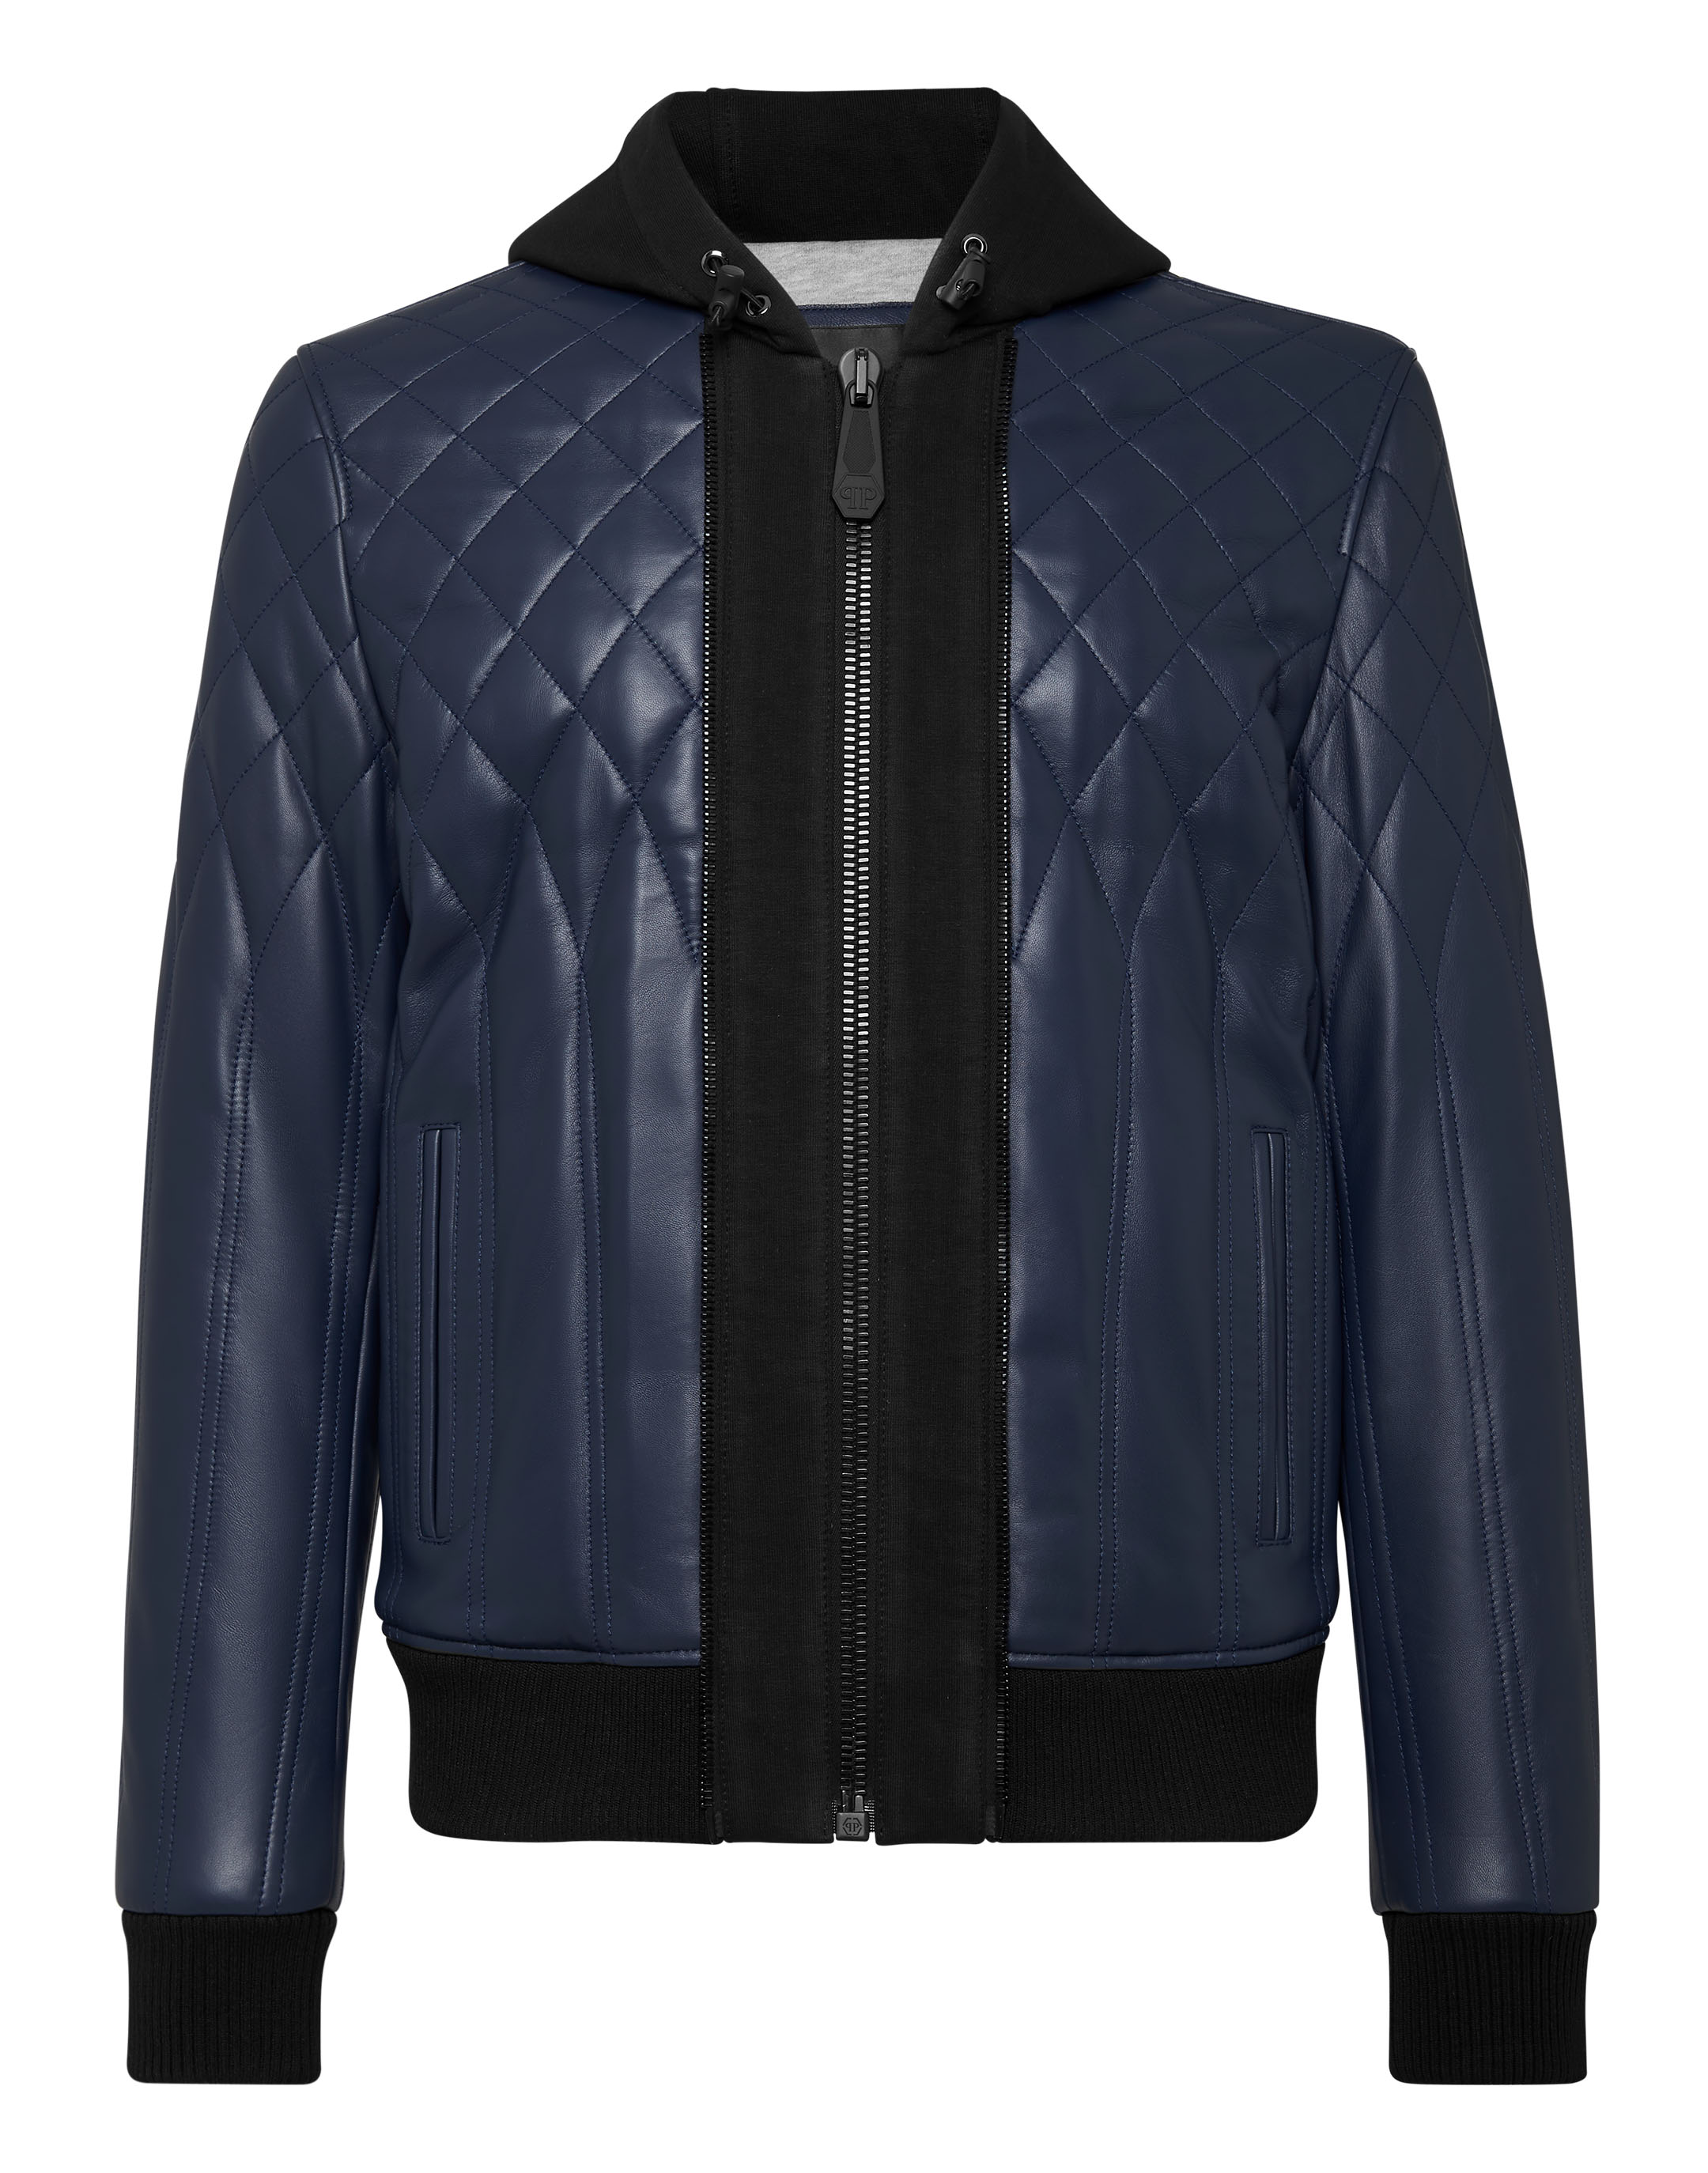 Python Leather College Jacket Basketball with Crystals